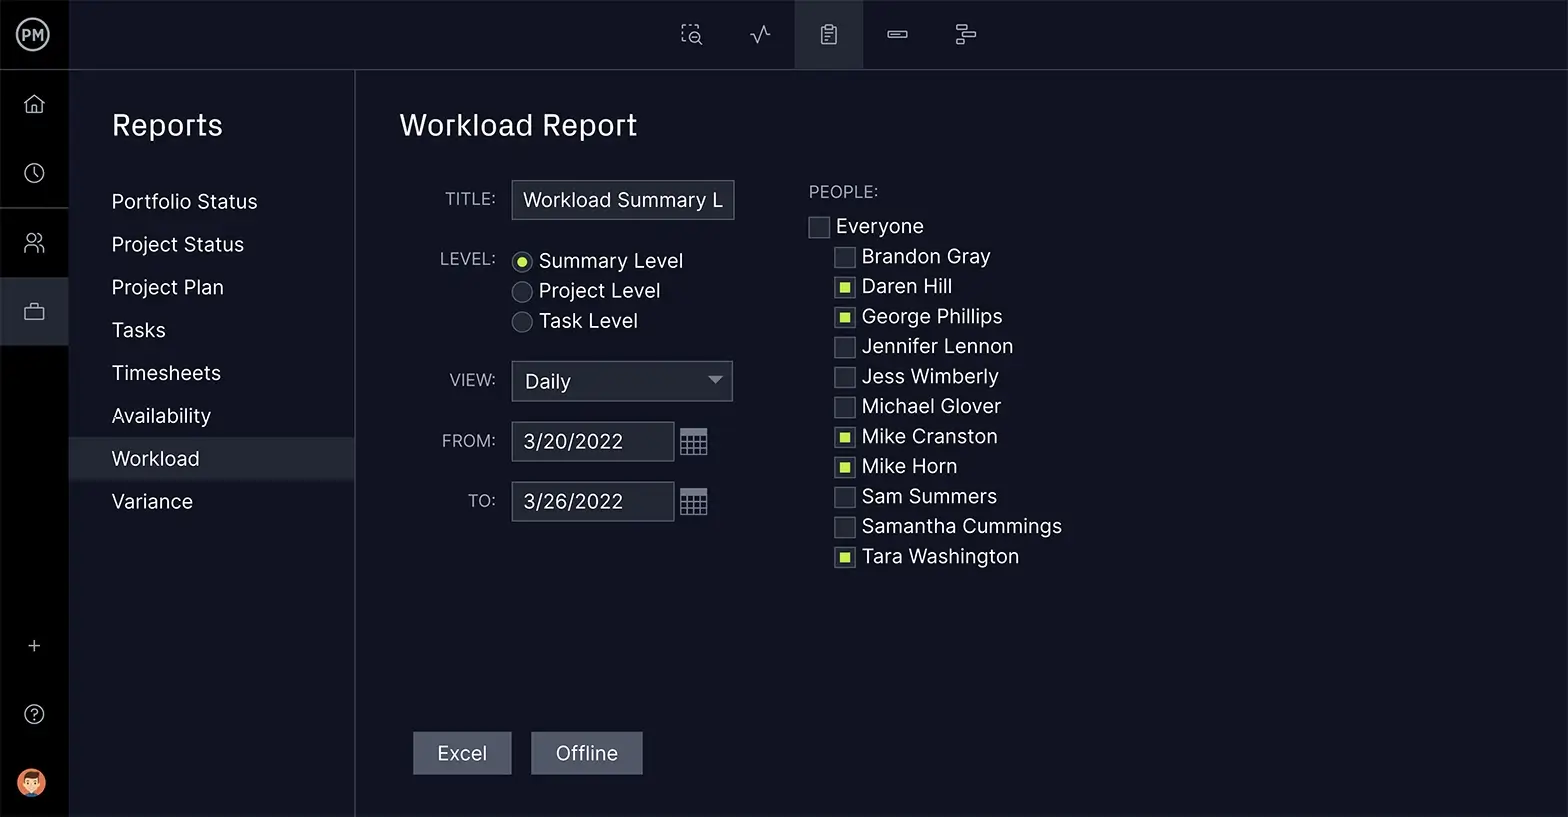 ProjectManager lets you create project scheduling reports